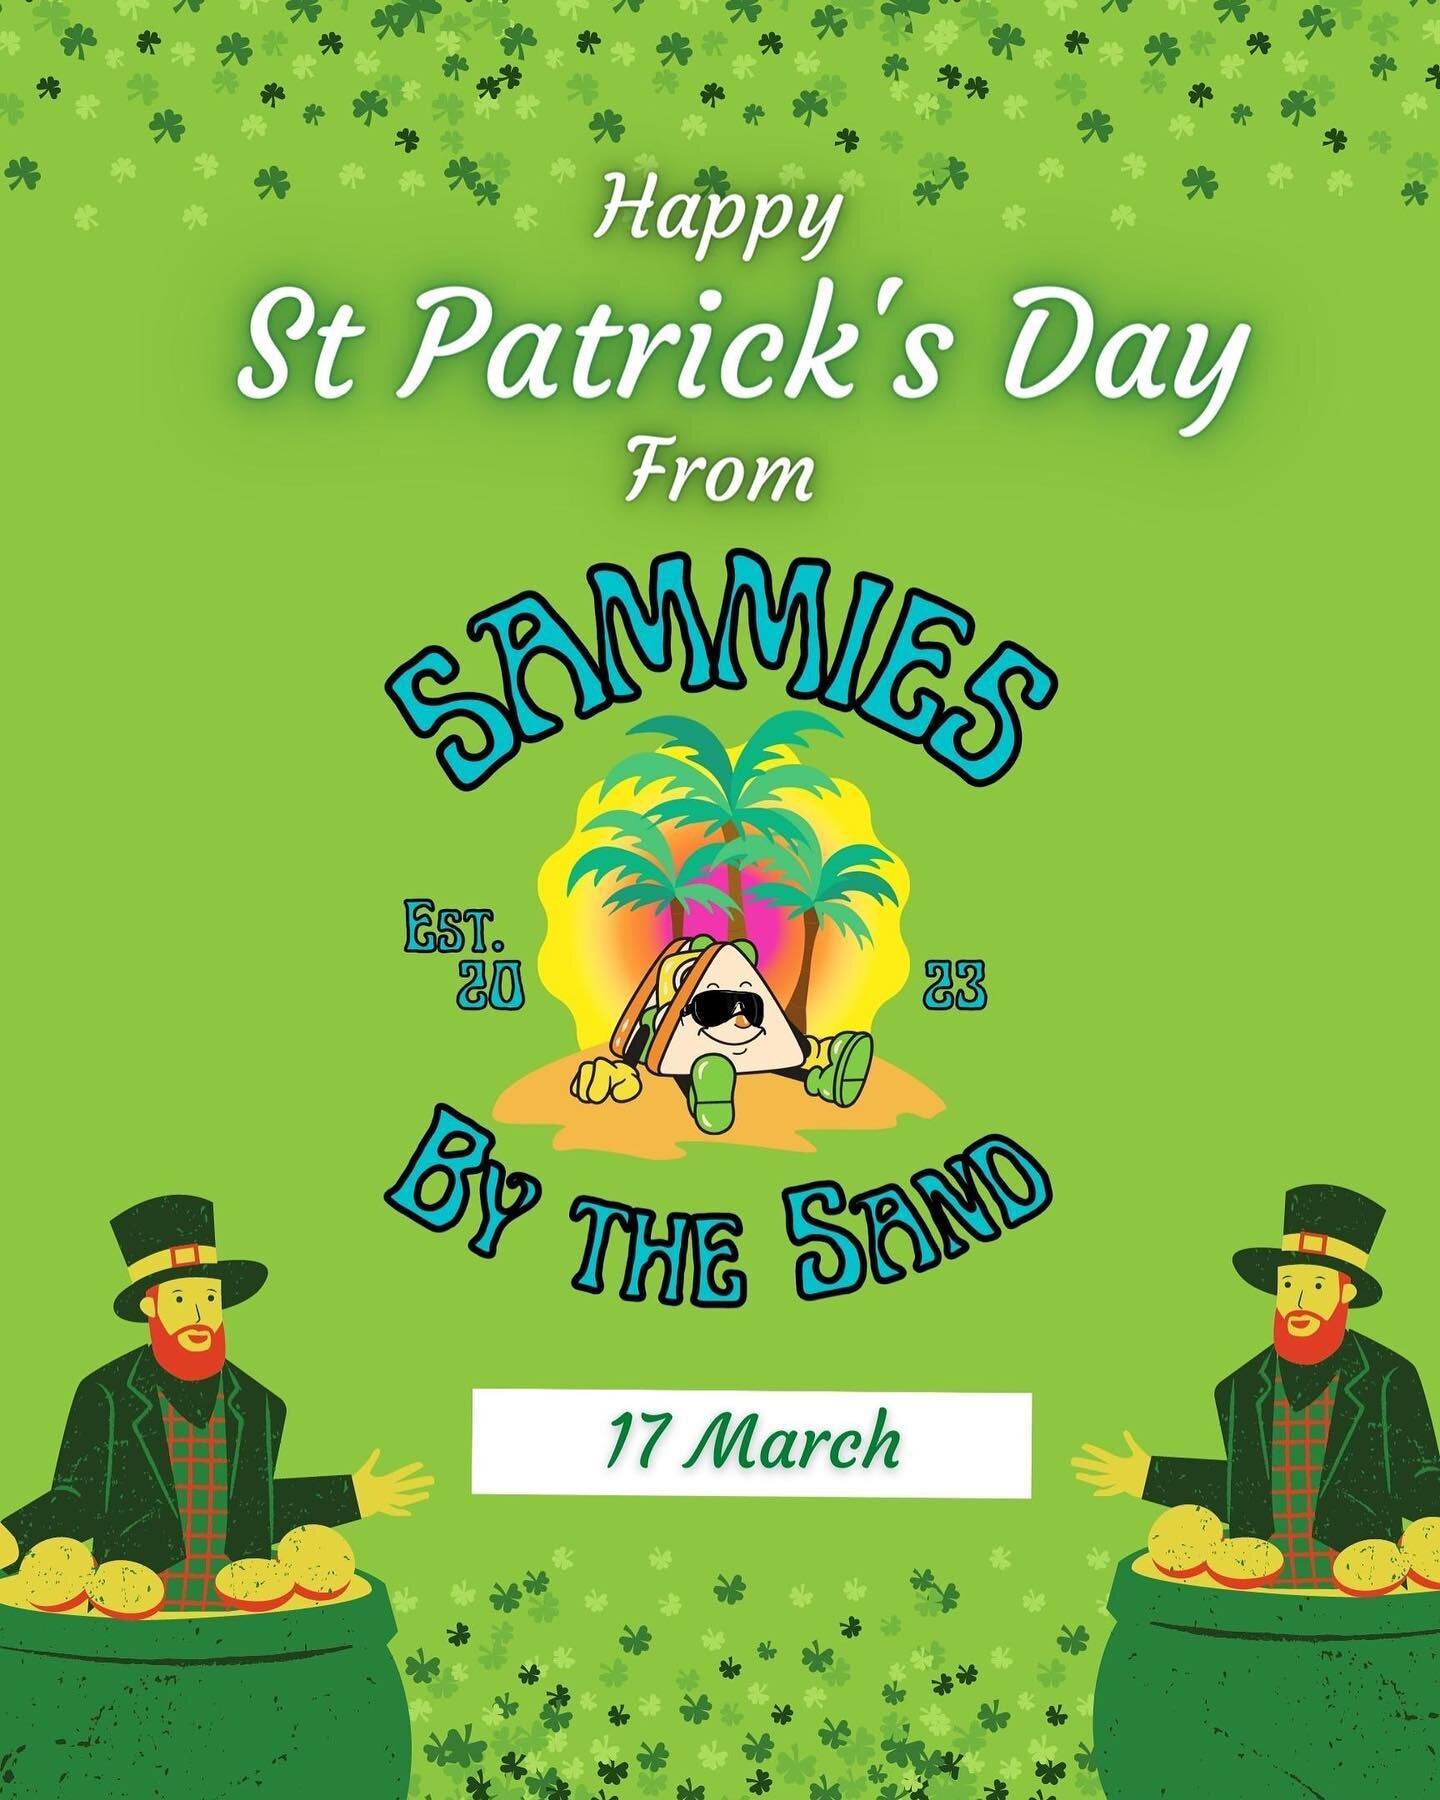 Happy St Paddys Day! Consider stopping by Sammies by the Sand and pick up some Sammies!! 🍀🥪 open 11a - 2a Friday and Saturday! You might get lucky and score some great deals too 😉